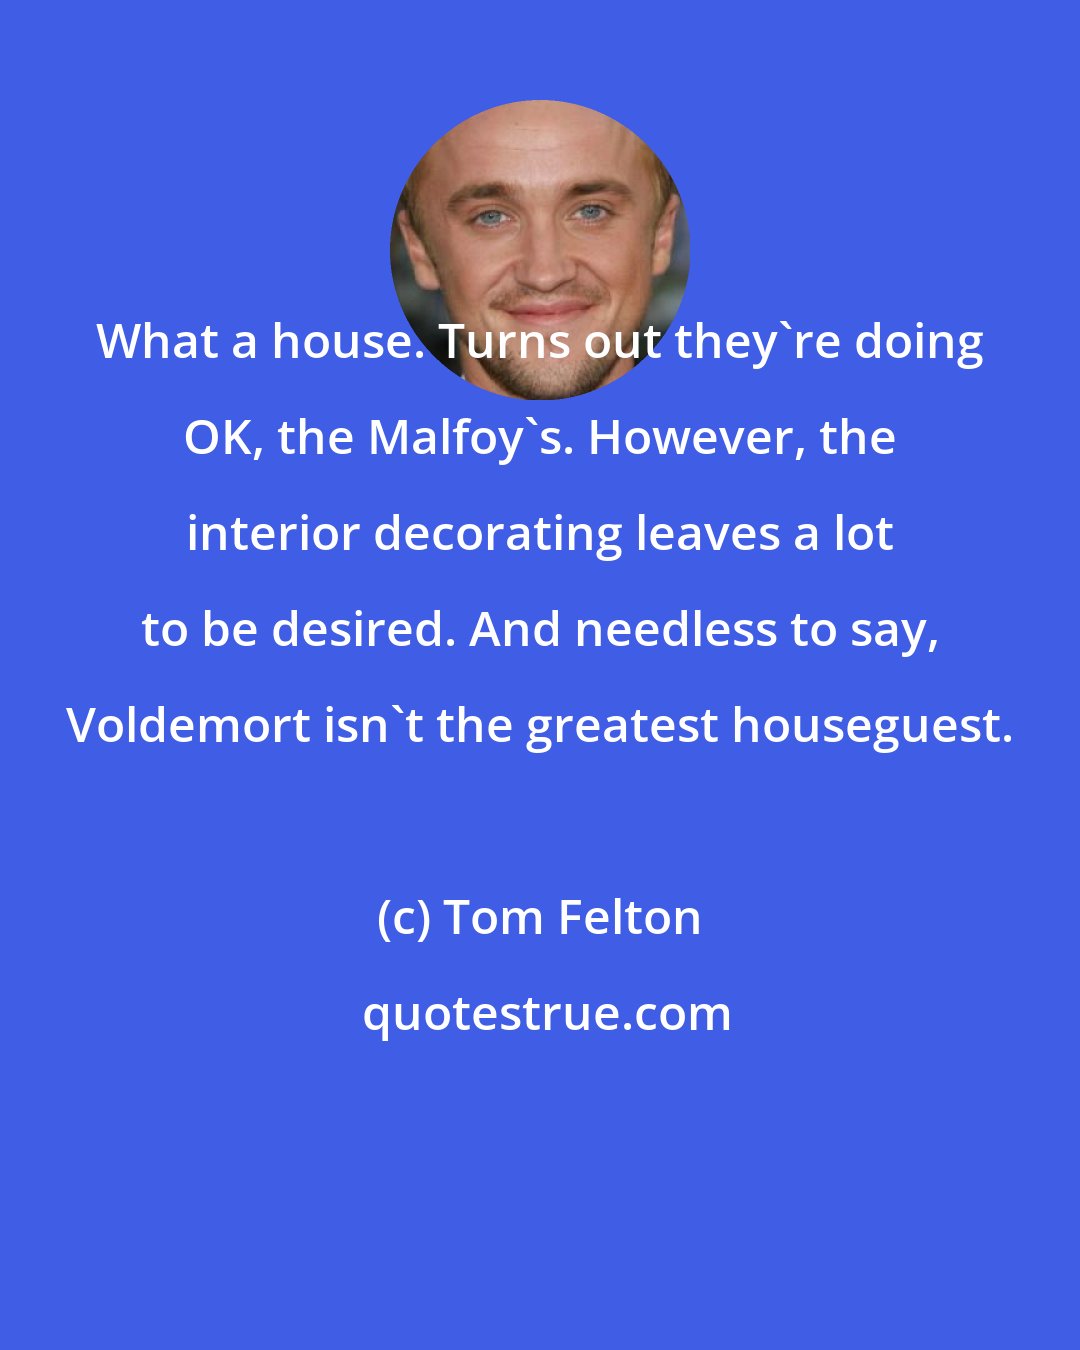 Tom Felton: What a house. Turns out they're doing OK, the Malfoy's. However, the interior decorating leaves a lot to be desired. And needless to say, Voldemort isn't the greatest houseguest.